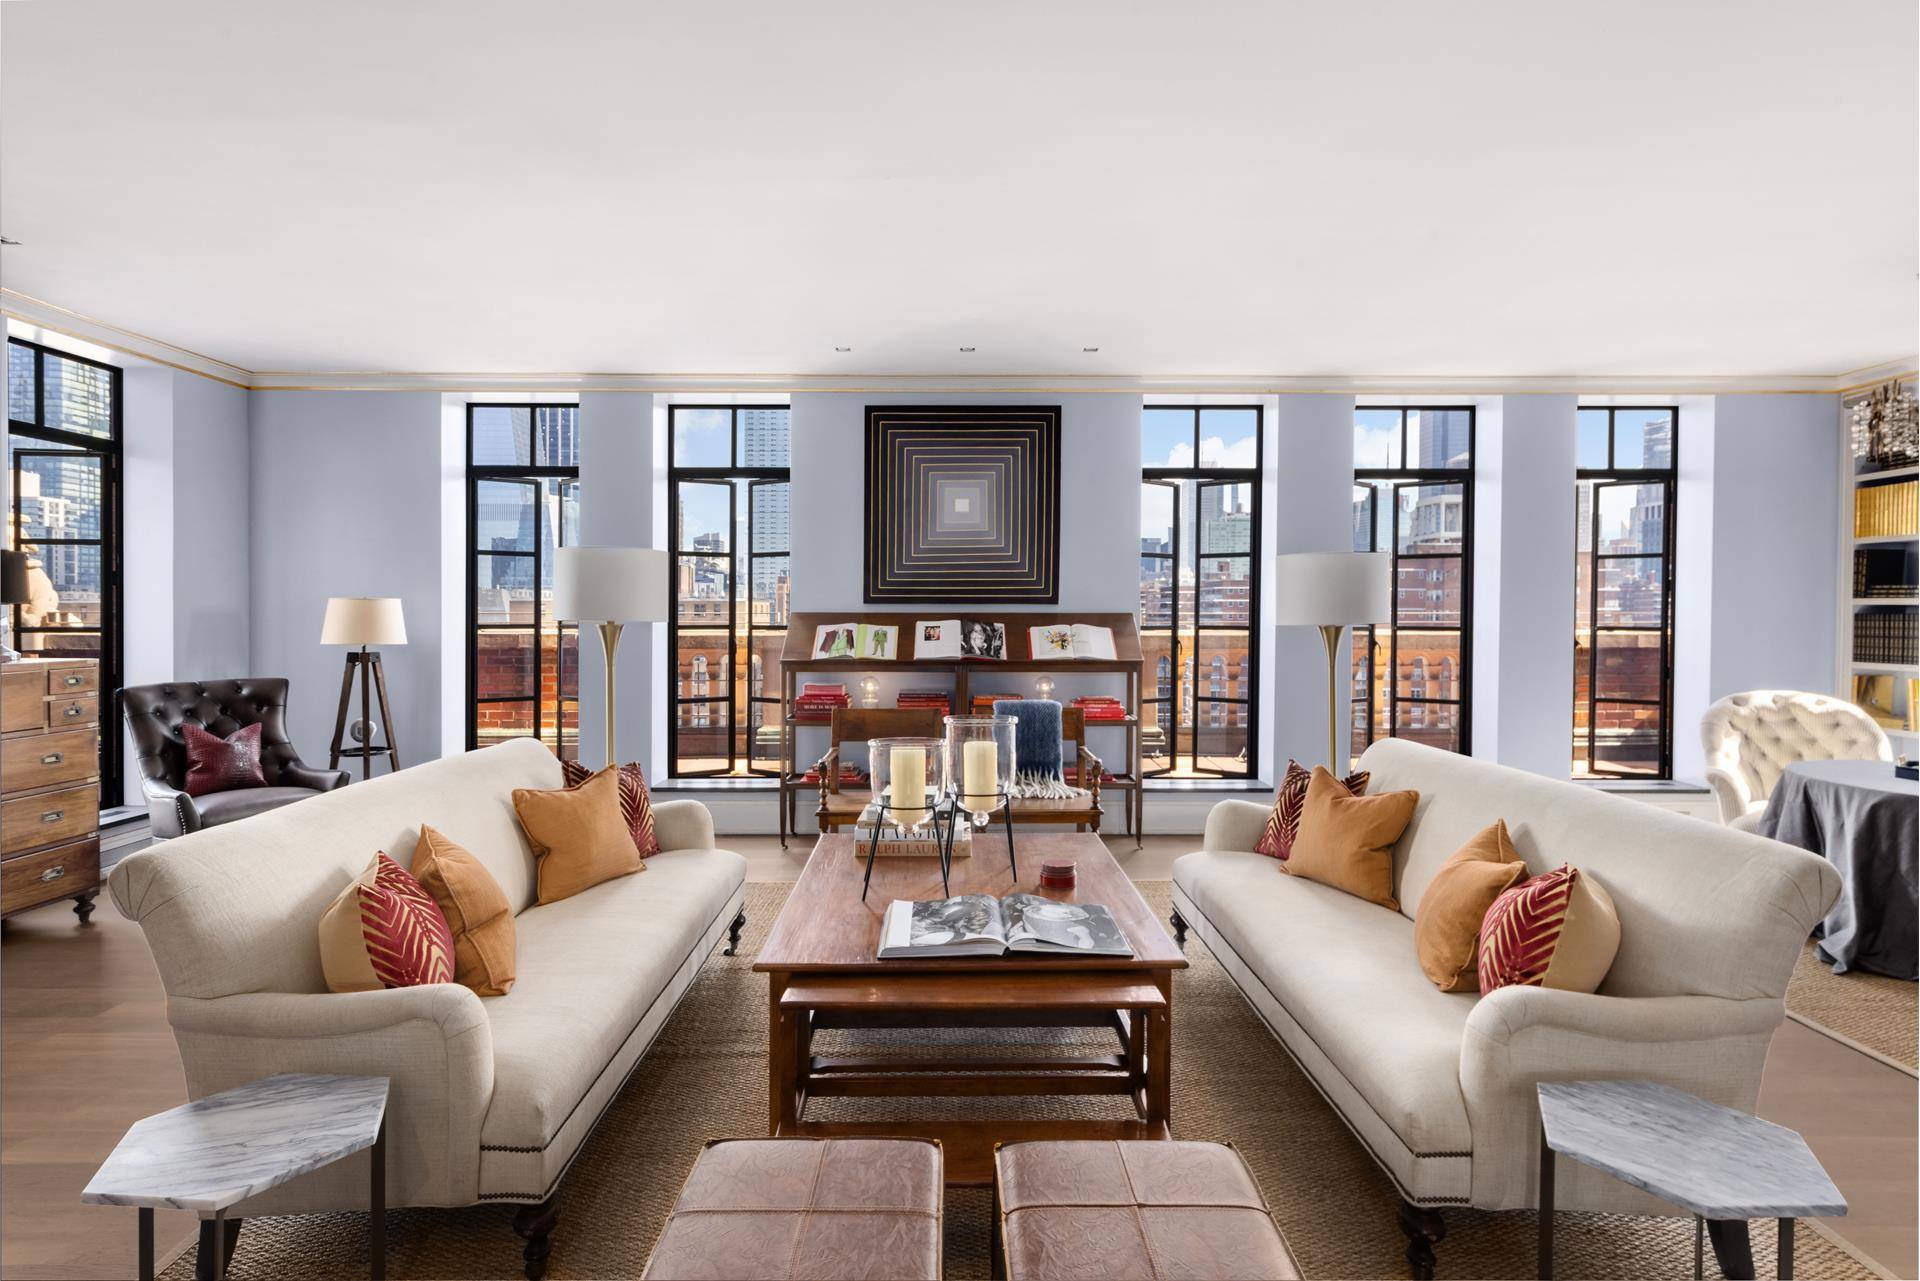 Introducing 410 West 24th Street, PHA The Premier Penthouse in Chelsea's true landmarked icon, London Terrace Towers.